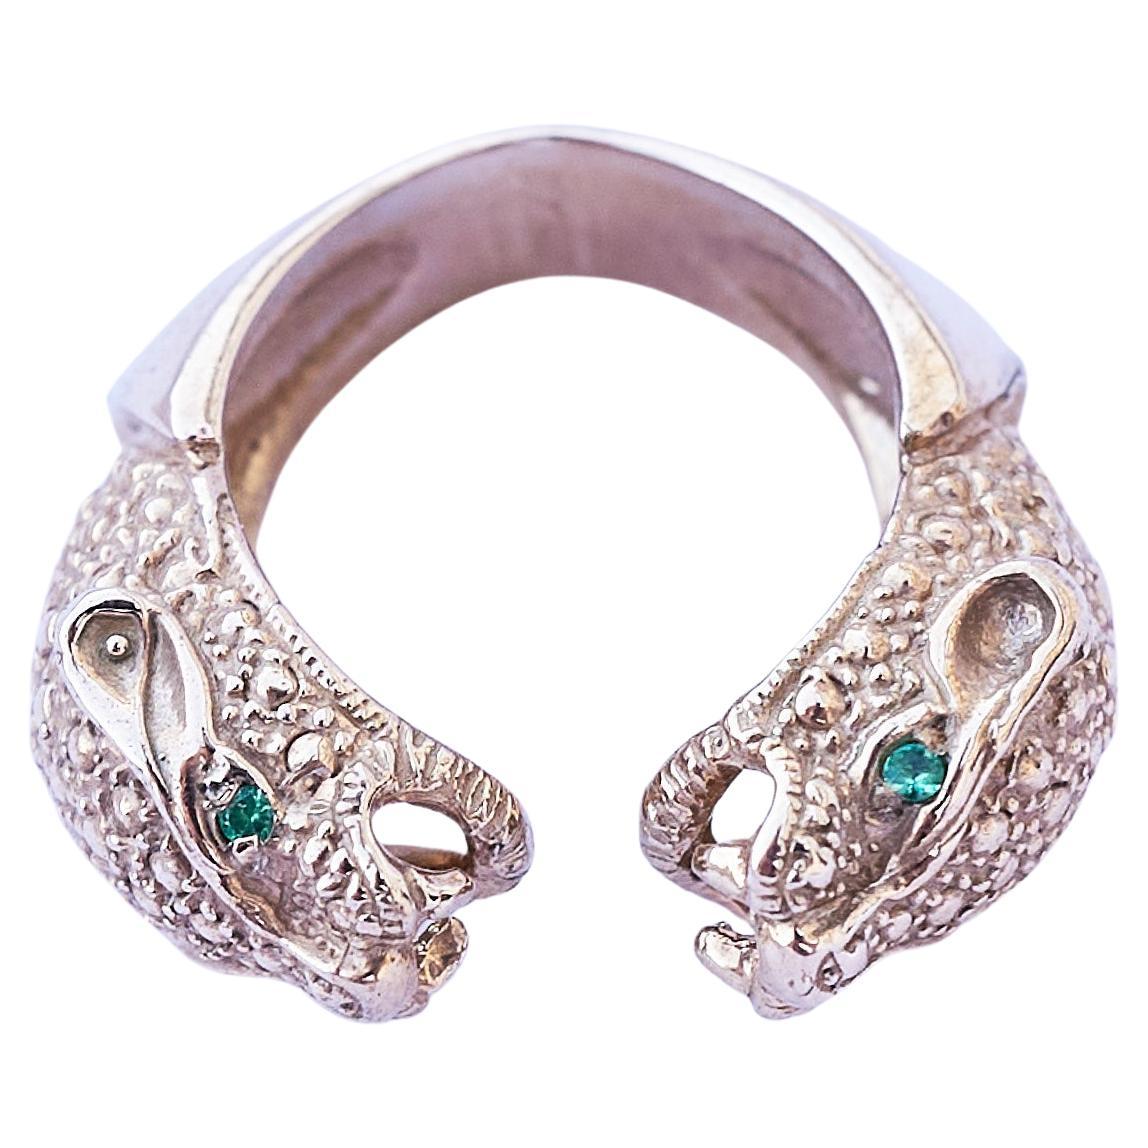 4 pcs Emerald Double Head Jaguar Ring Bronze Cocktail Ring Animal Jewelry J Dauphin

Open ring tiny adjustable between sizes 5-8 

Hand Made in Los Angeles

In Mayan mythology, the jaguar was seen as the ruler of the Underworld, and as such, a